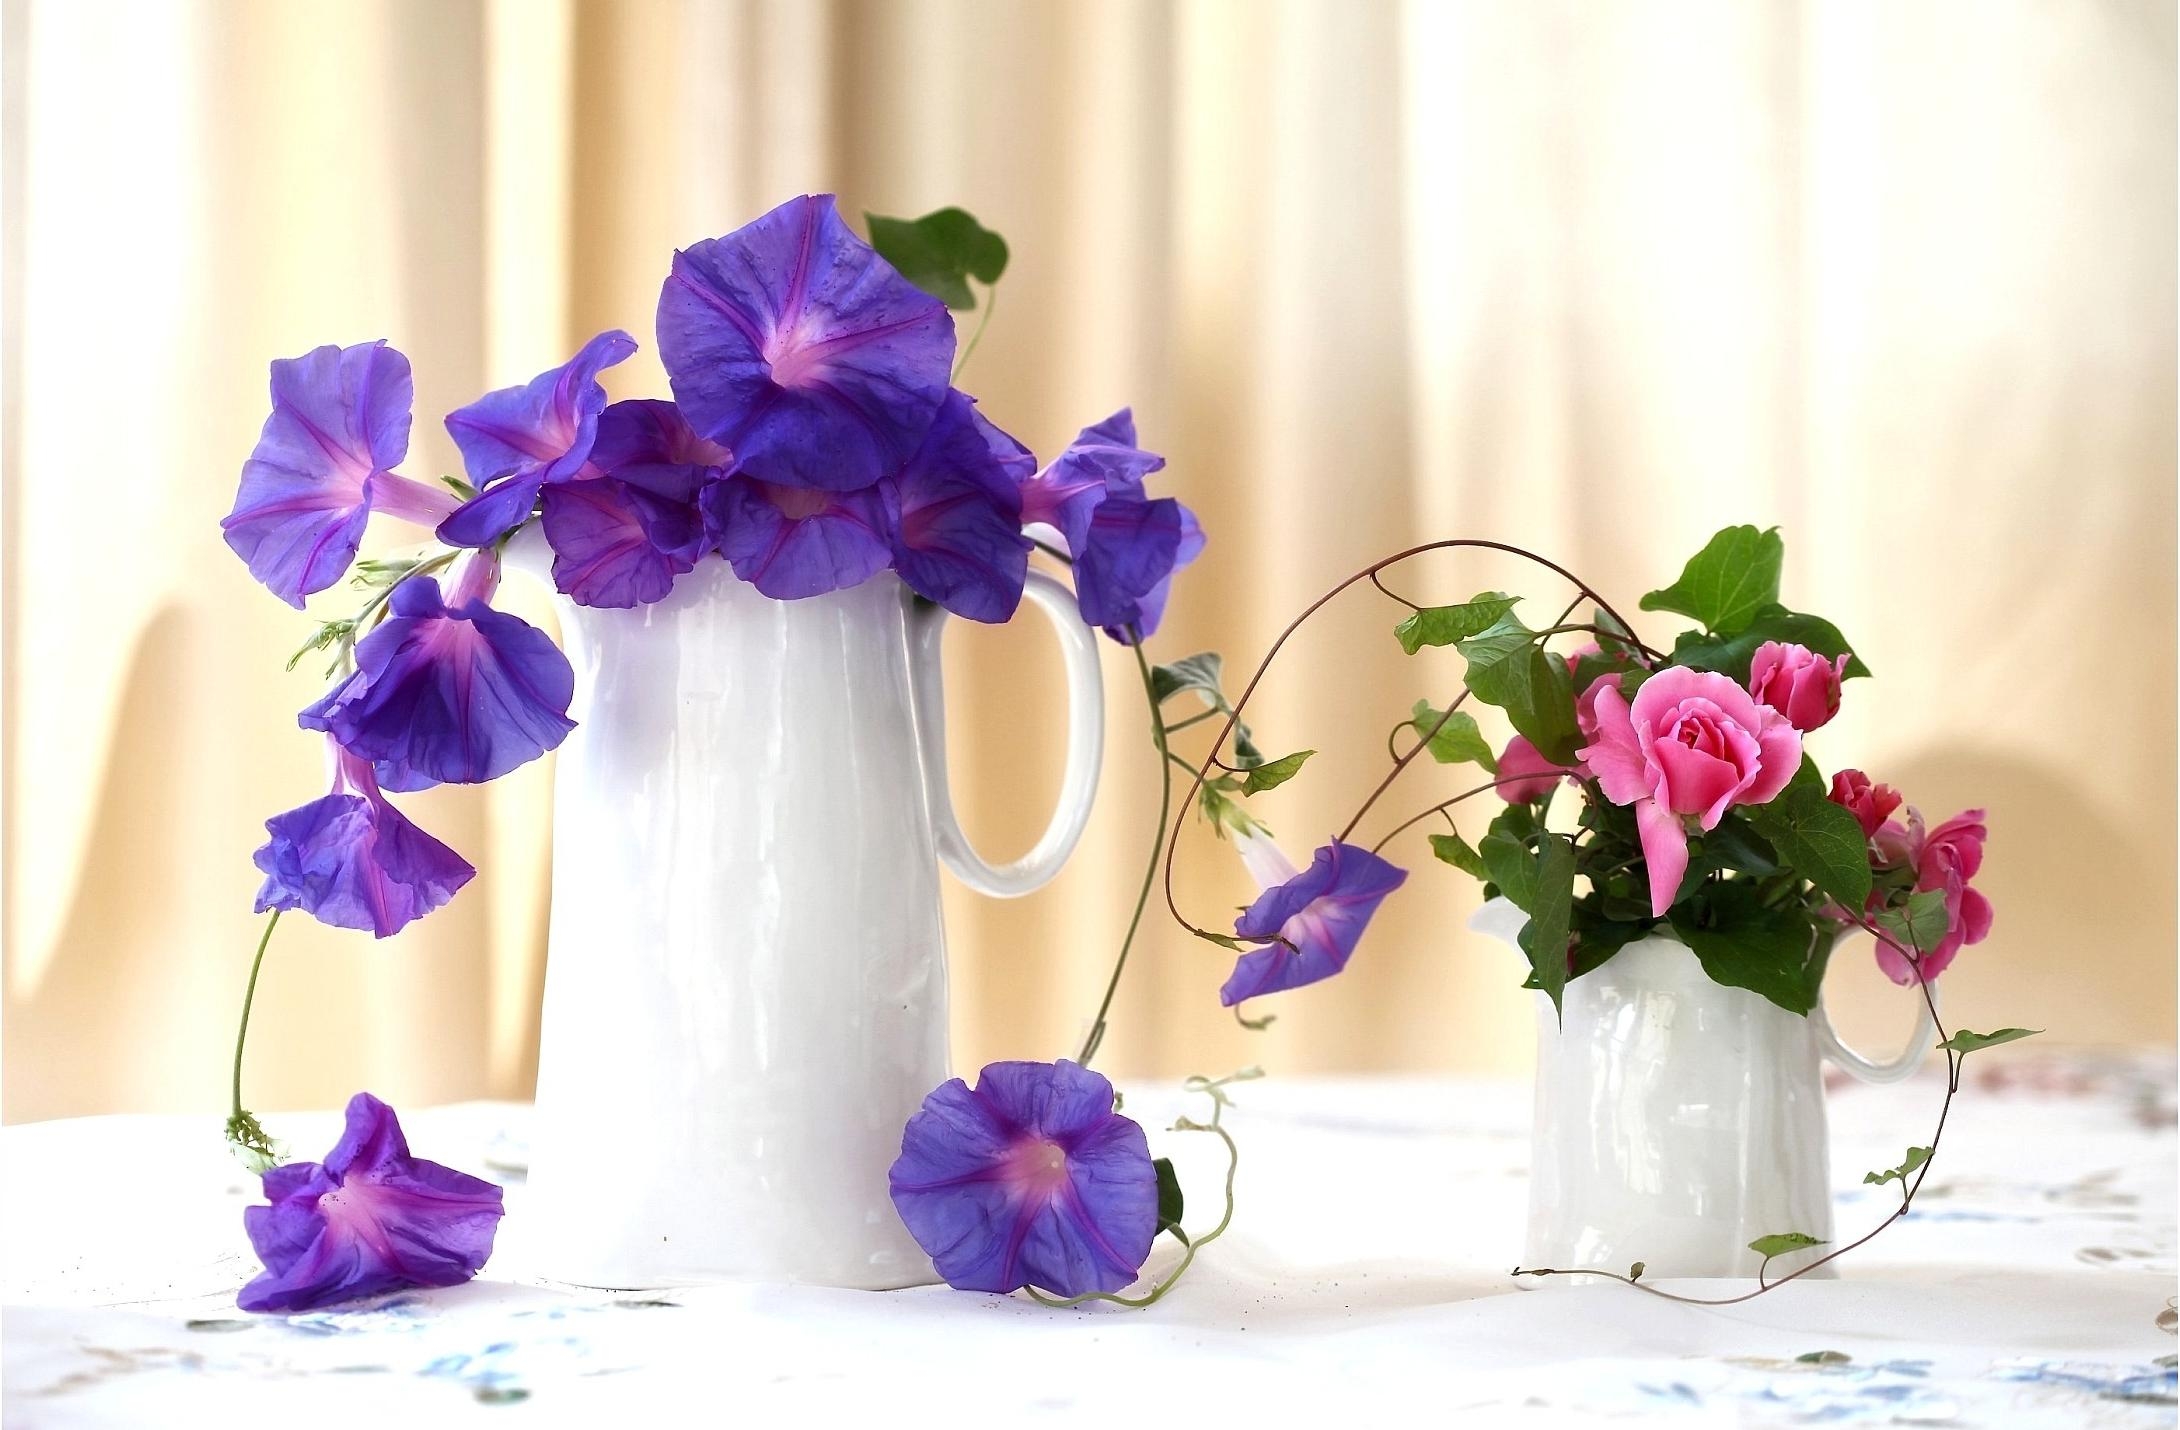 handsomely, morning glory, roses, flowers, composition, it's beautiful, jugs, ipme Full HD